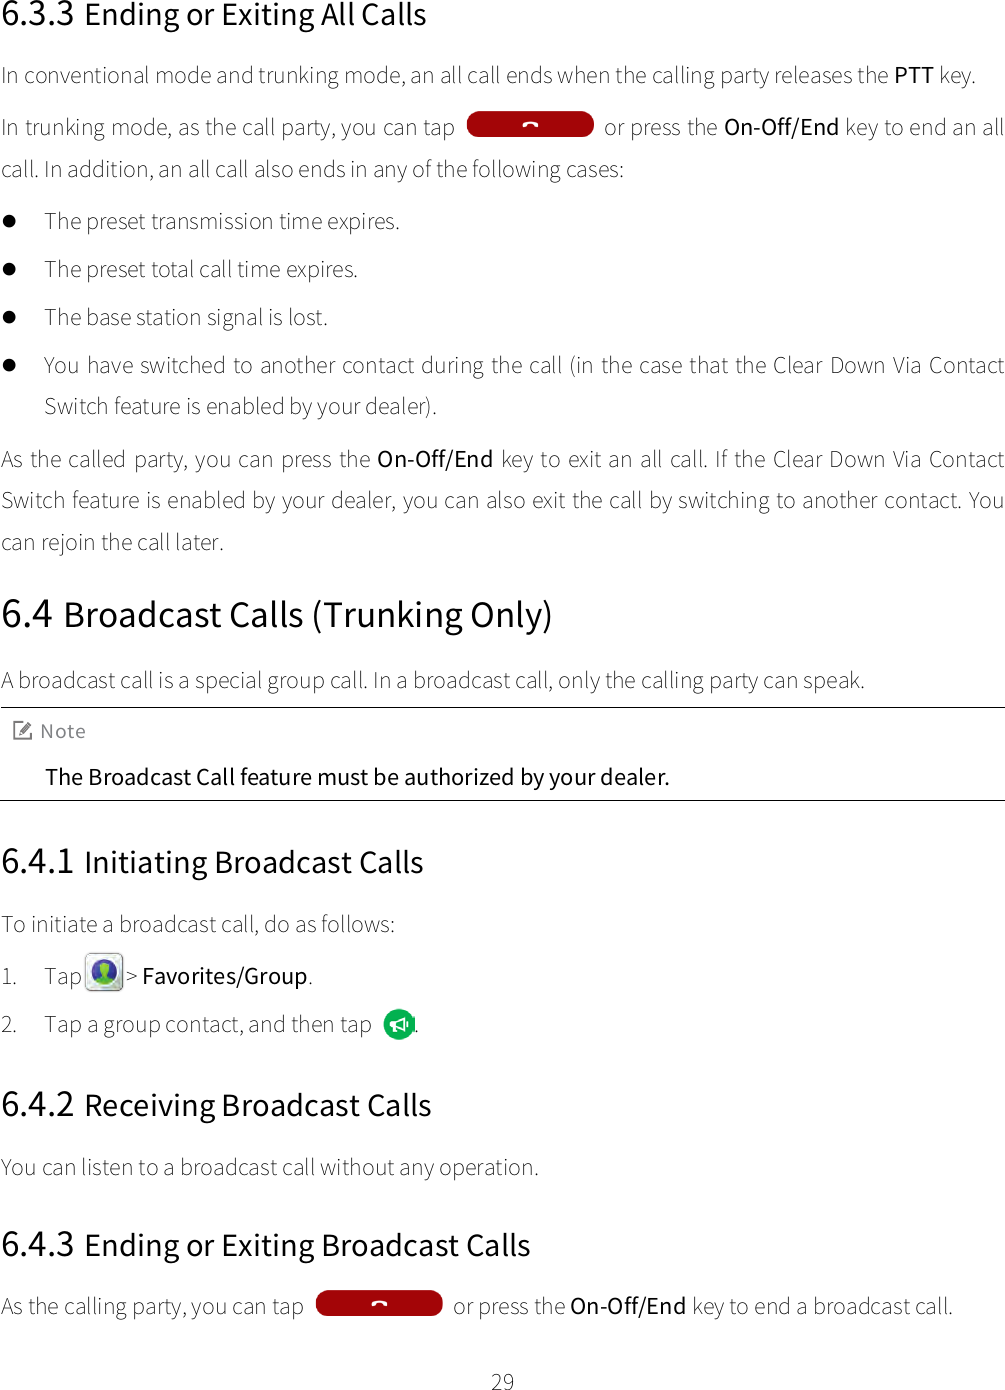    29  6.3.3 Ending or Exiting All Calls In conventional mode and trunking mode, an all call ends when the calling party releases the PTT key. In trunking mode, as the call party, you can tap  or press the On-Off/End key to end an all call. In addition, an all call also ends in any of the following cases:  The preset transmission time expires.  The preset total call time expires.  The base station signal is lost.  You have switched to another contact during the call (in the case that the Clear Down Via Contact Switch feature is enabled by your dealer). As the called party, you can press the On-Off/End key to exit an all call. If the Clear Down Via Contact Switch feature is enabled by your dealer, you can also exit the call by switching to another contact. You can rejoin the call later. 6.4 Broadcast Calls (Trunking Only) A broadcast call is a special group call. In a broadcast call, only the calling party can speak. Note The Broadcast Call feature must be authorized by your dealer. 6.4.1 Initiating Broadcast Calls To initiate a broadcast call, do as follows: 1. Tap    &gt; Favorites/Group. 2. Tap a group contact, and then tap  . 6.4.2 Receiving Broadcast Calls You can listen to a broadcast call without any operation. 6.4.3 Ending or Exiting Broadcast Calls As the calling party, you can tap    or press the On-Off/End key to end a broadcast call. 